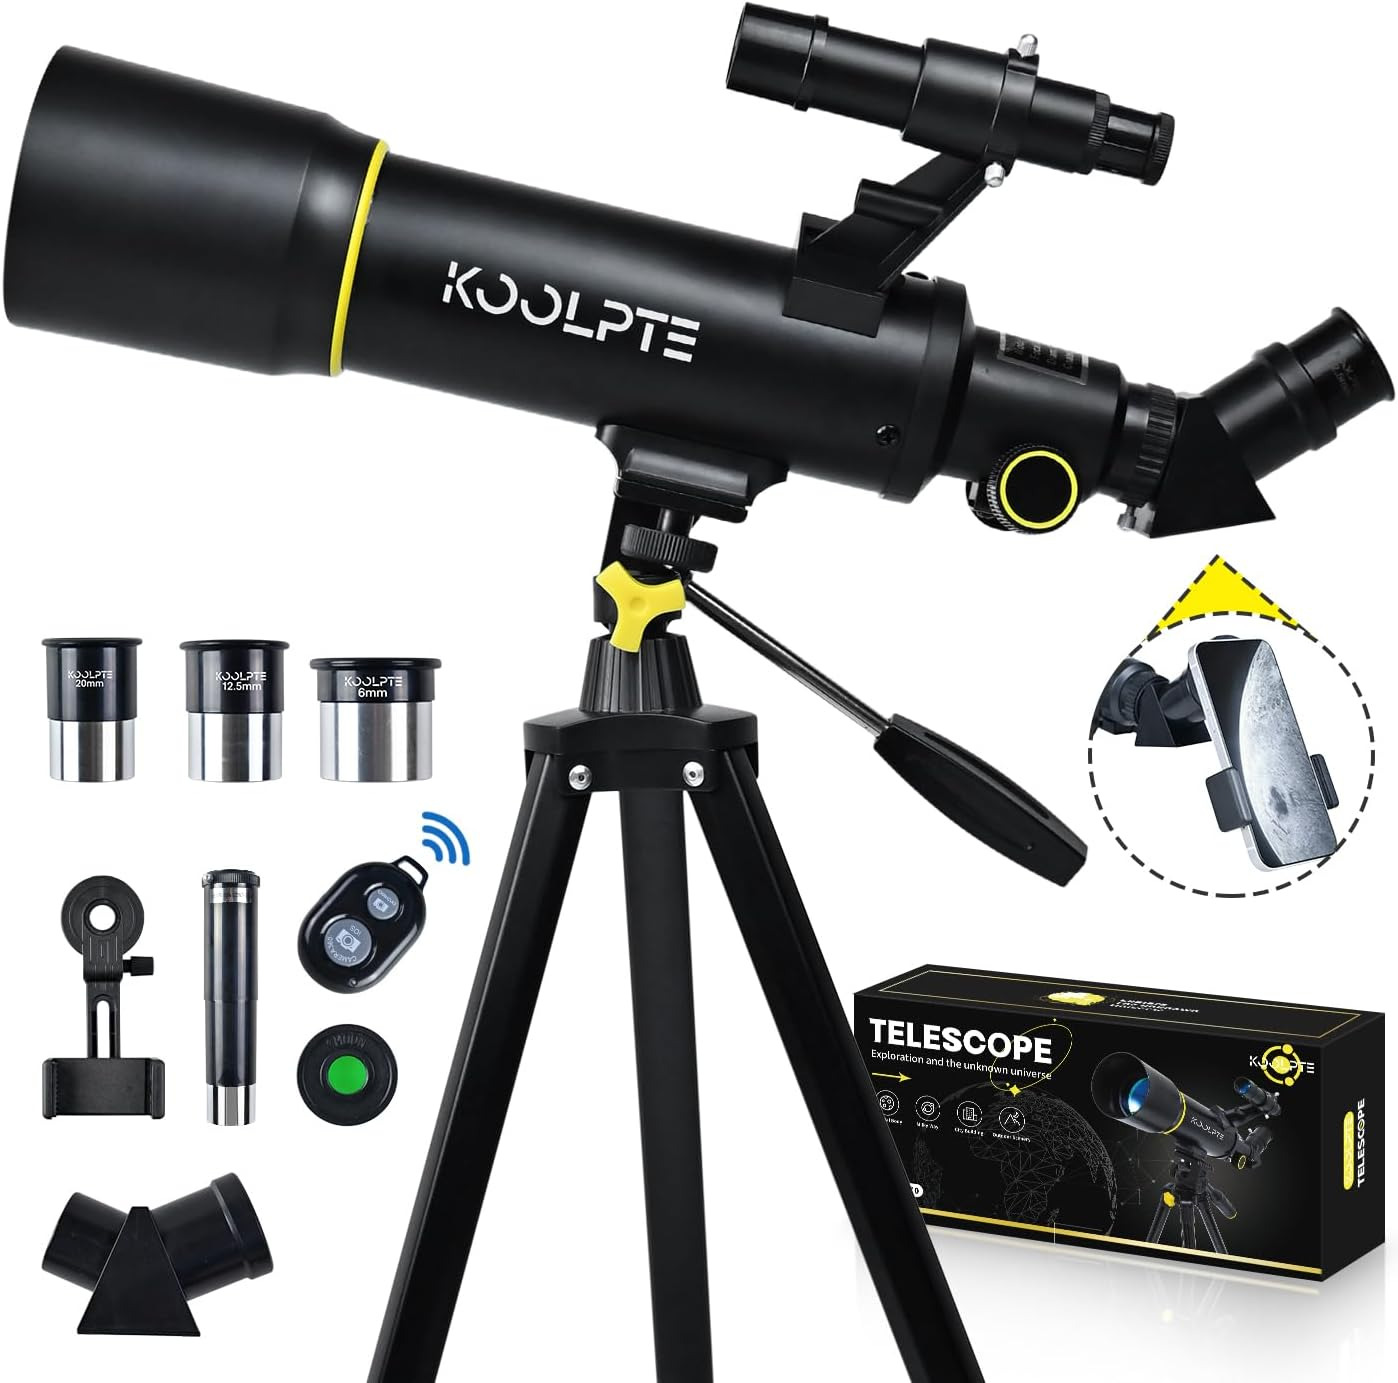 70mm Aperture Telescope - 20X-200X Magnification, Portable with Phone Adapter an